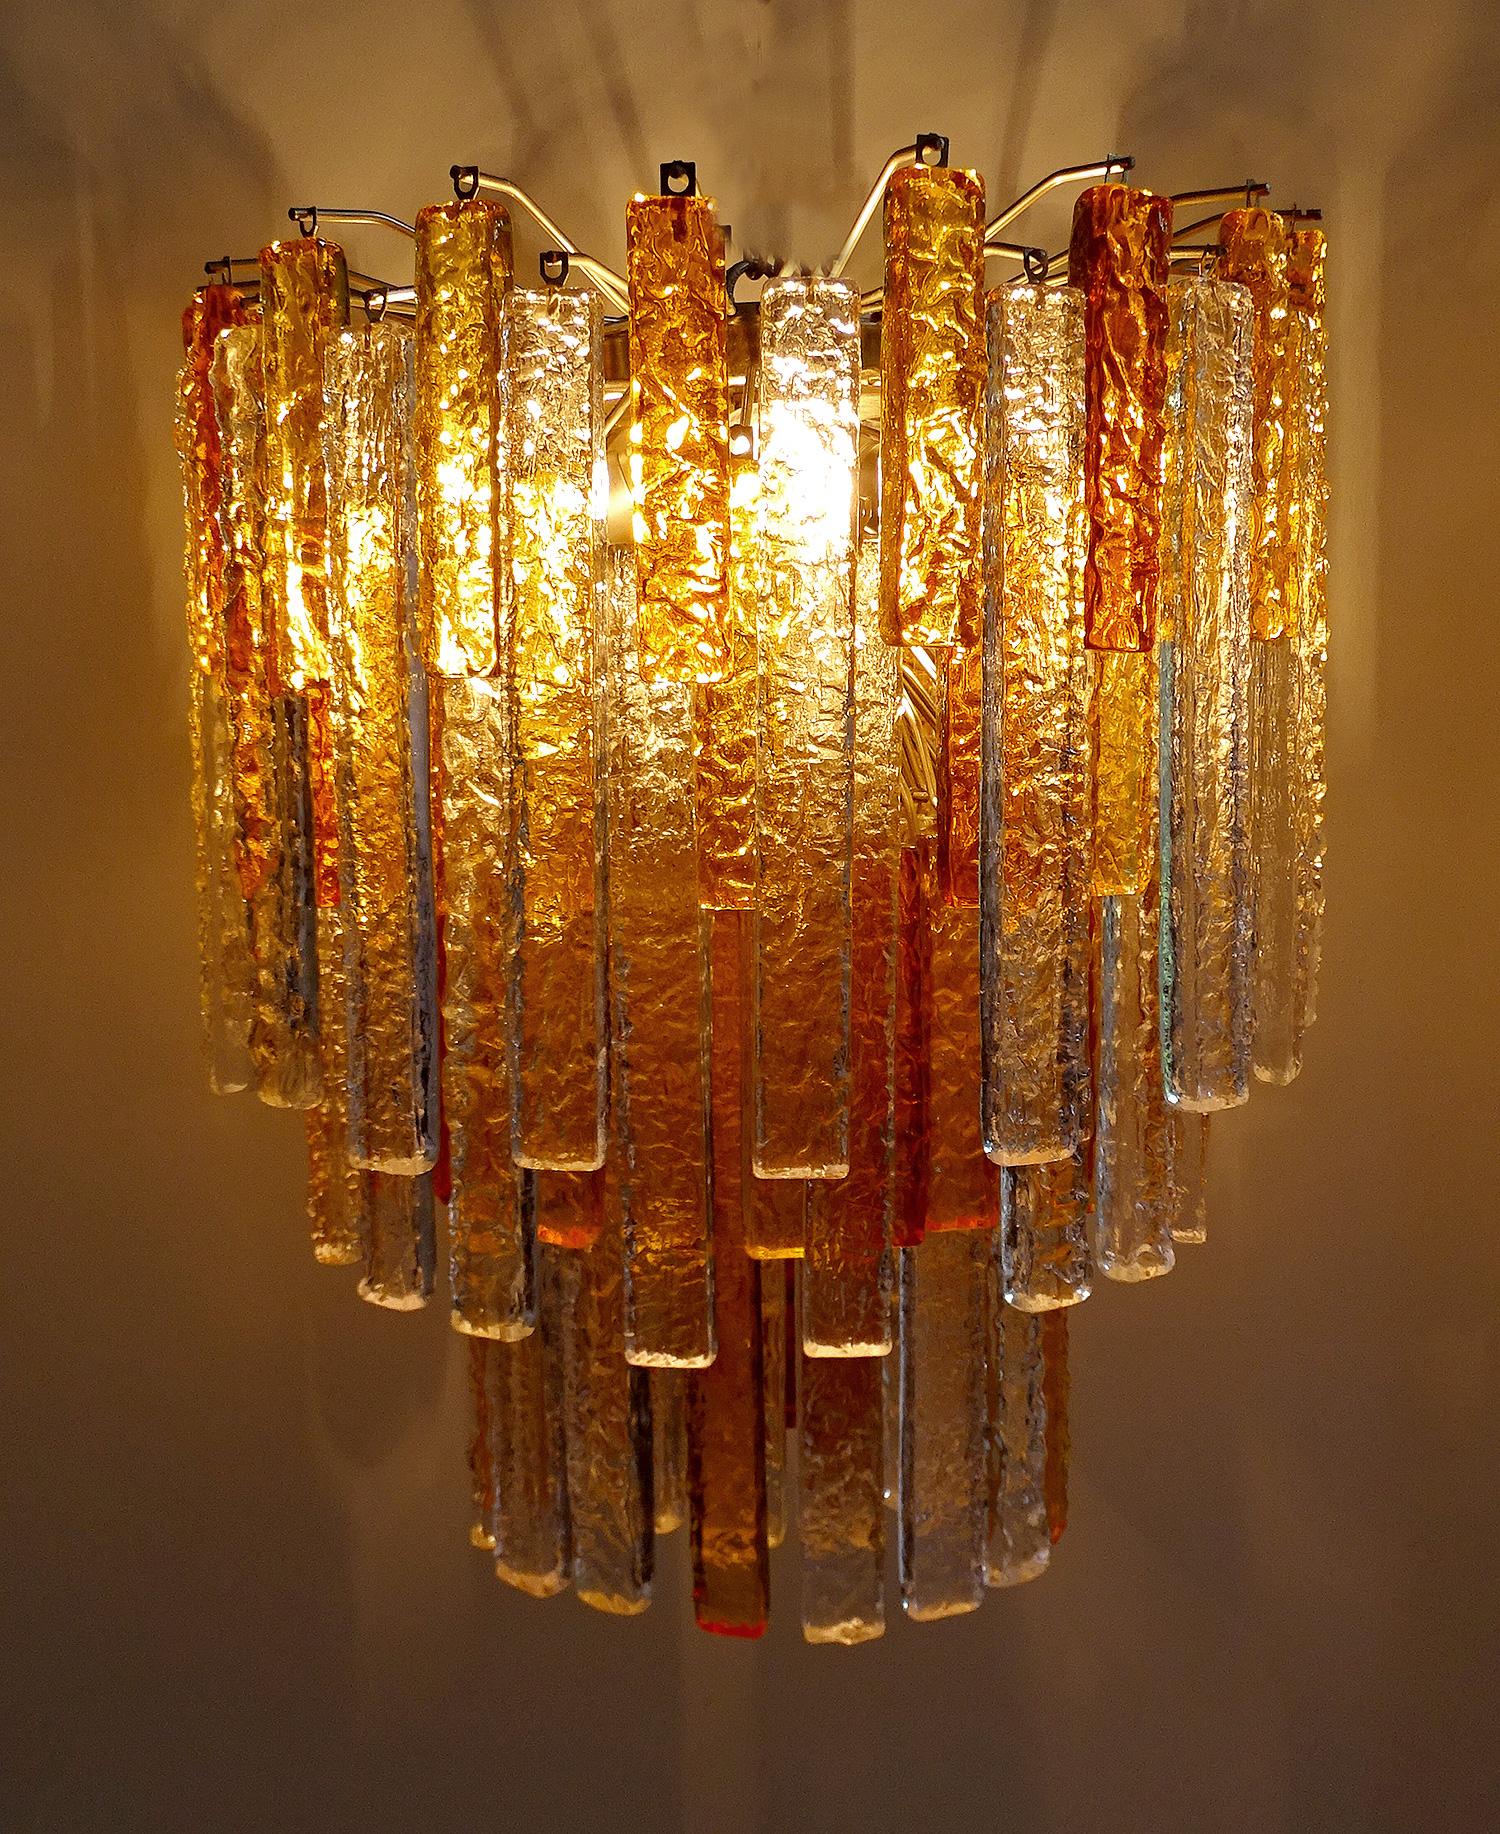 Pair of 1960s Murano glass chandelier by Mazzega, with each 127 textured pendants in five distinct colors and two height sizes: white, light yellow, light amber, amber and dark amber tone. The number of colors pendant differs somewhat for both